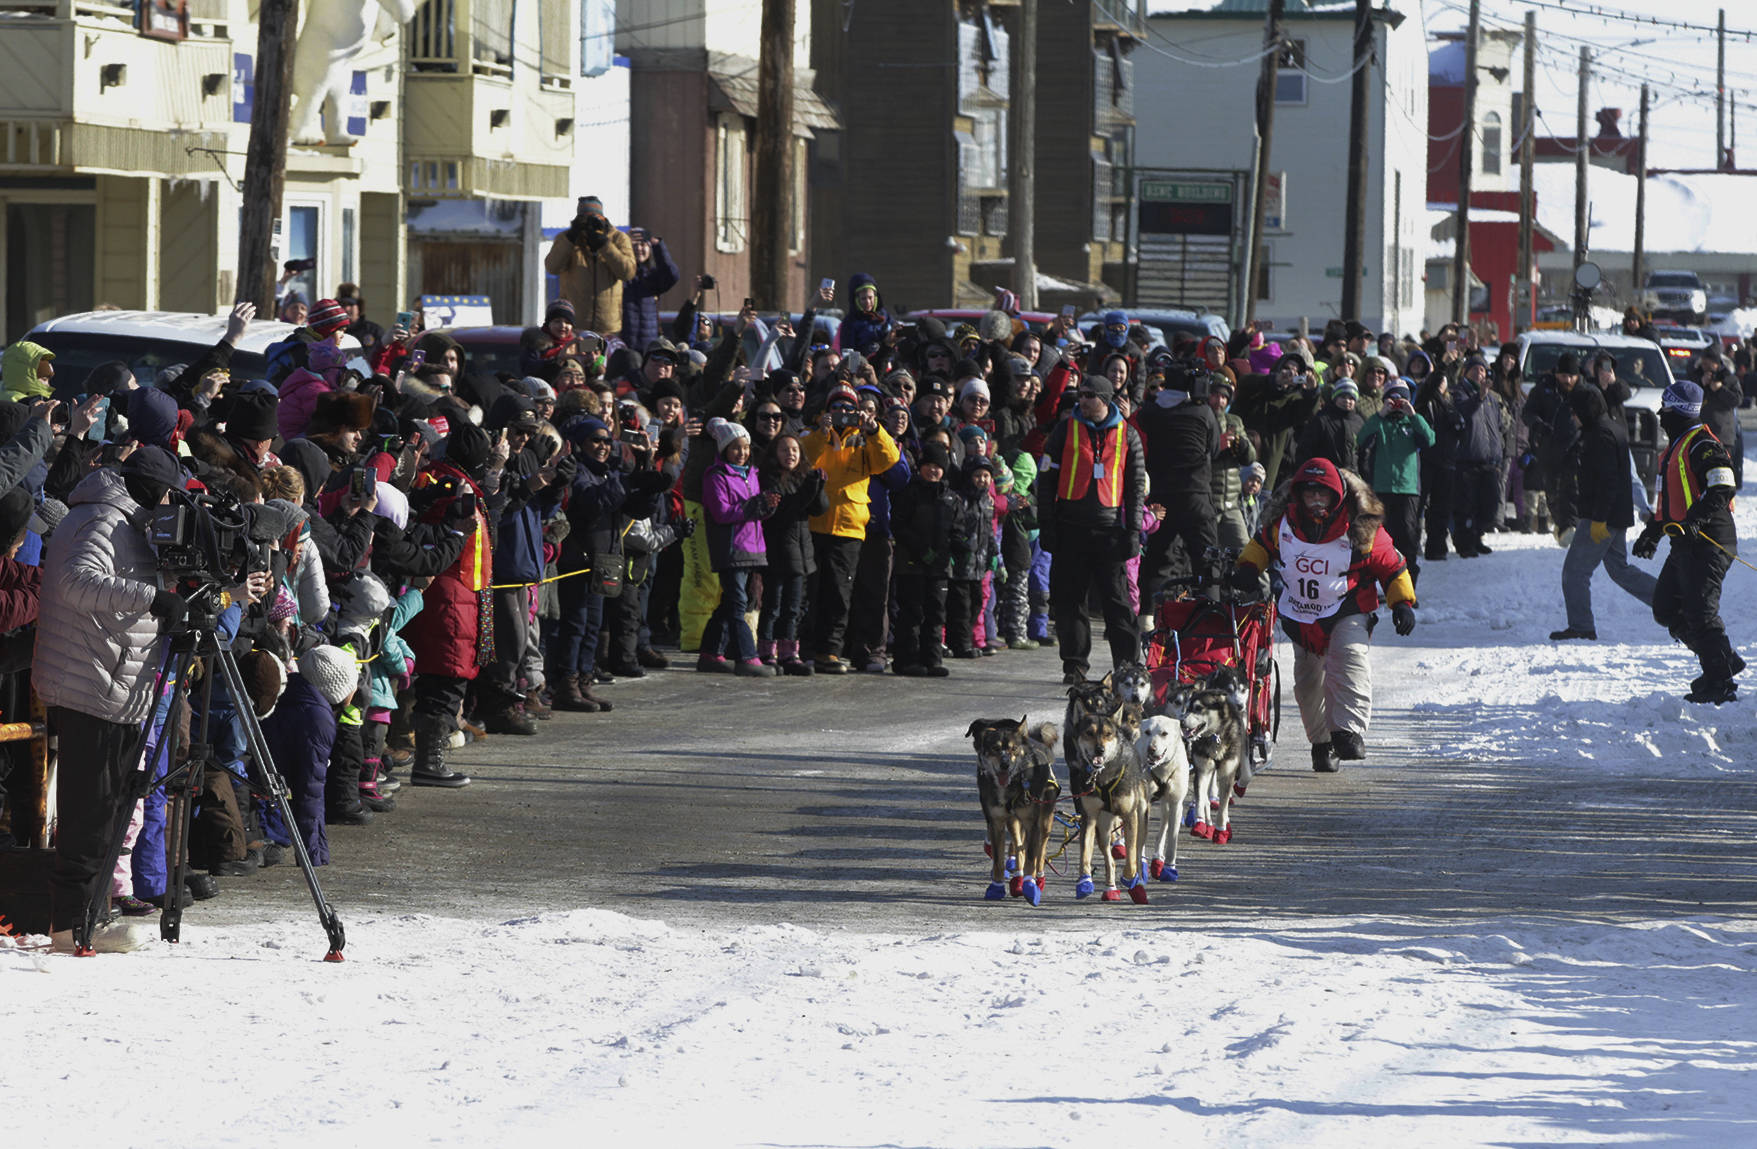 Mitch Seavey, of Sterling, Alaska, runs towards the finish line under the Burled Arch, winning the 1,000-mile Iditarod Trail Sled Dog Race, in Nome, Alaska, Tuesday, March 14, 2017. Seavey won his third Iditarod Trail Sled Dog Race on Tuesday, becoming the fastest and oldest champion at age 57 and helping cement his family’s position as mushing royalty. (AP Photo/Diana Haecker)